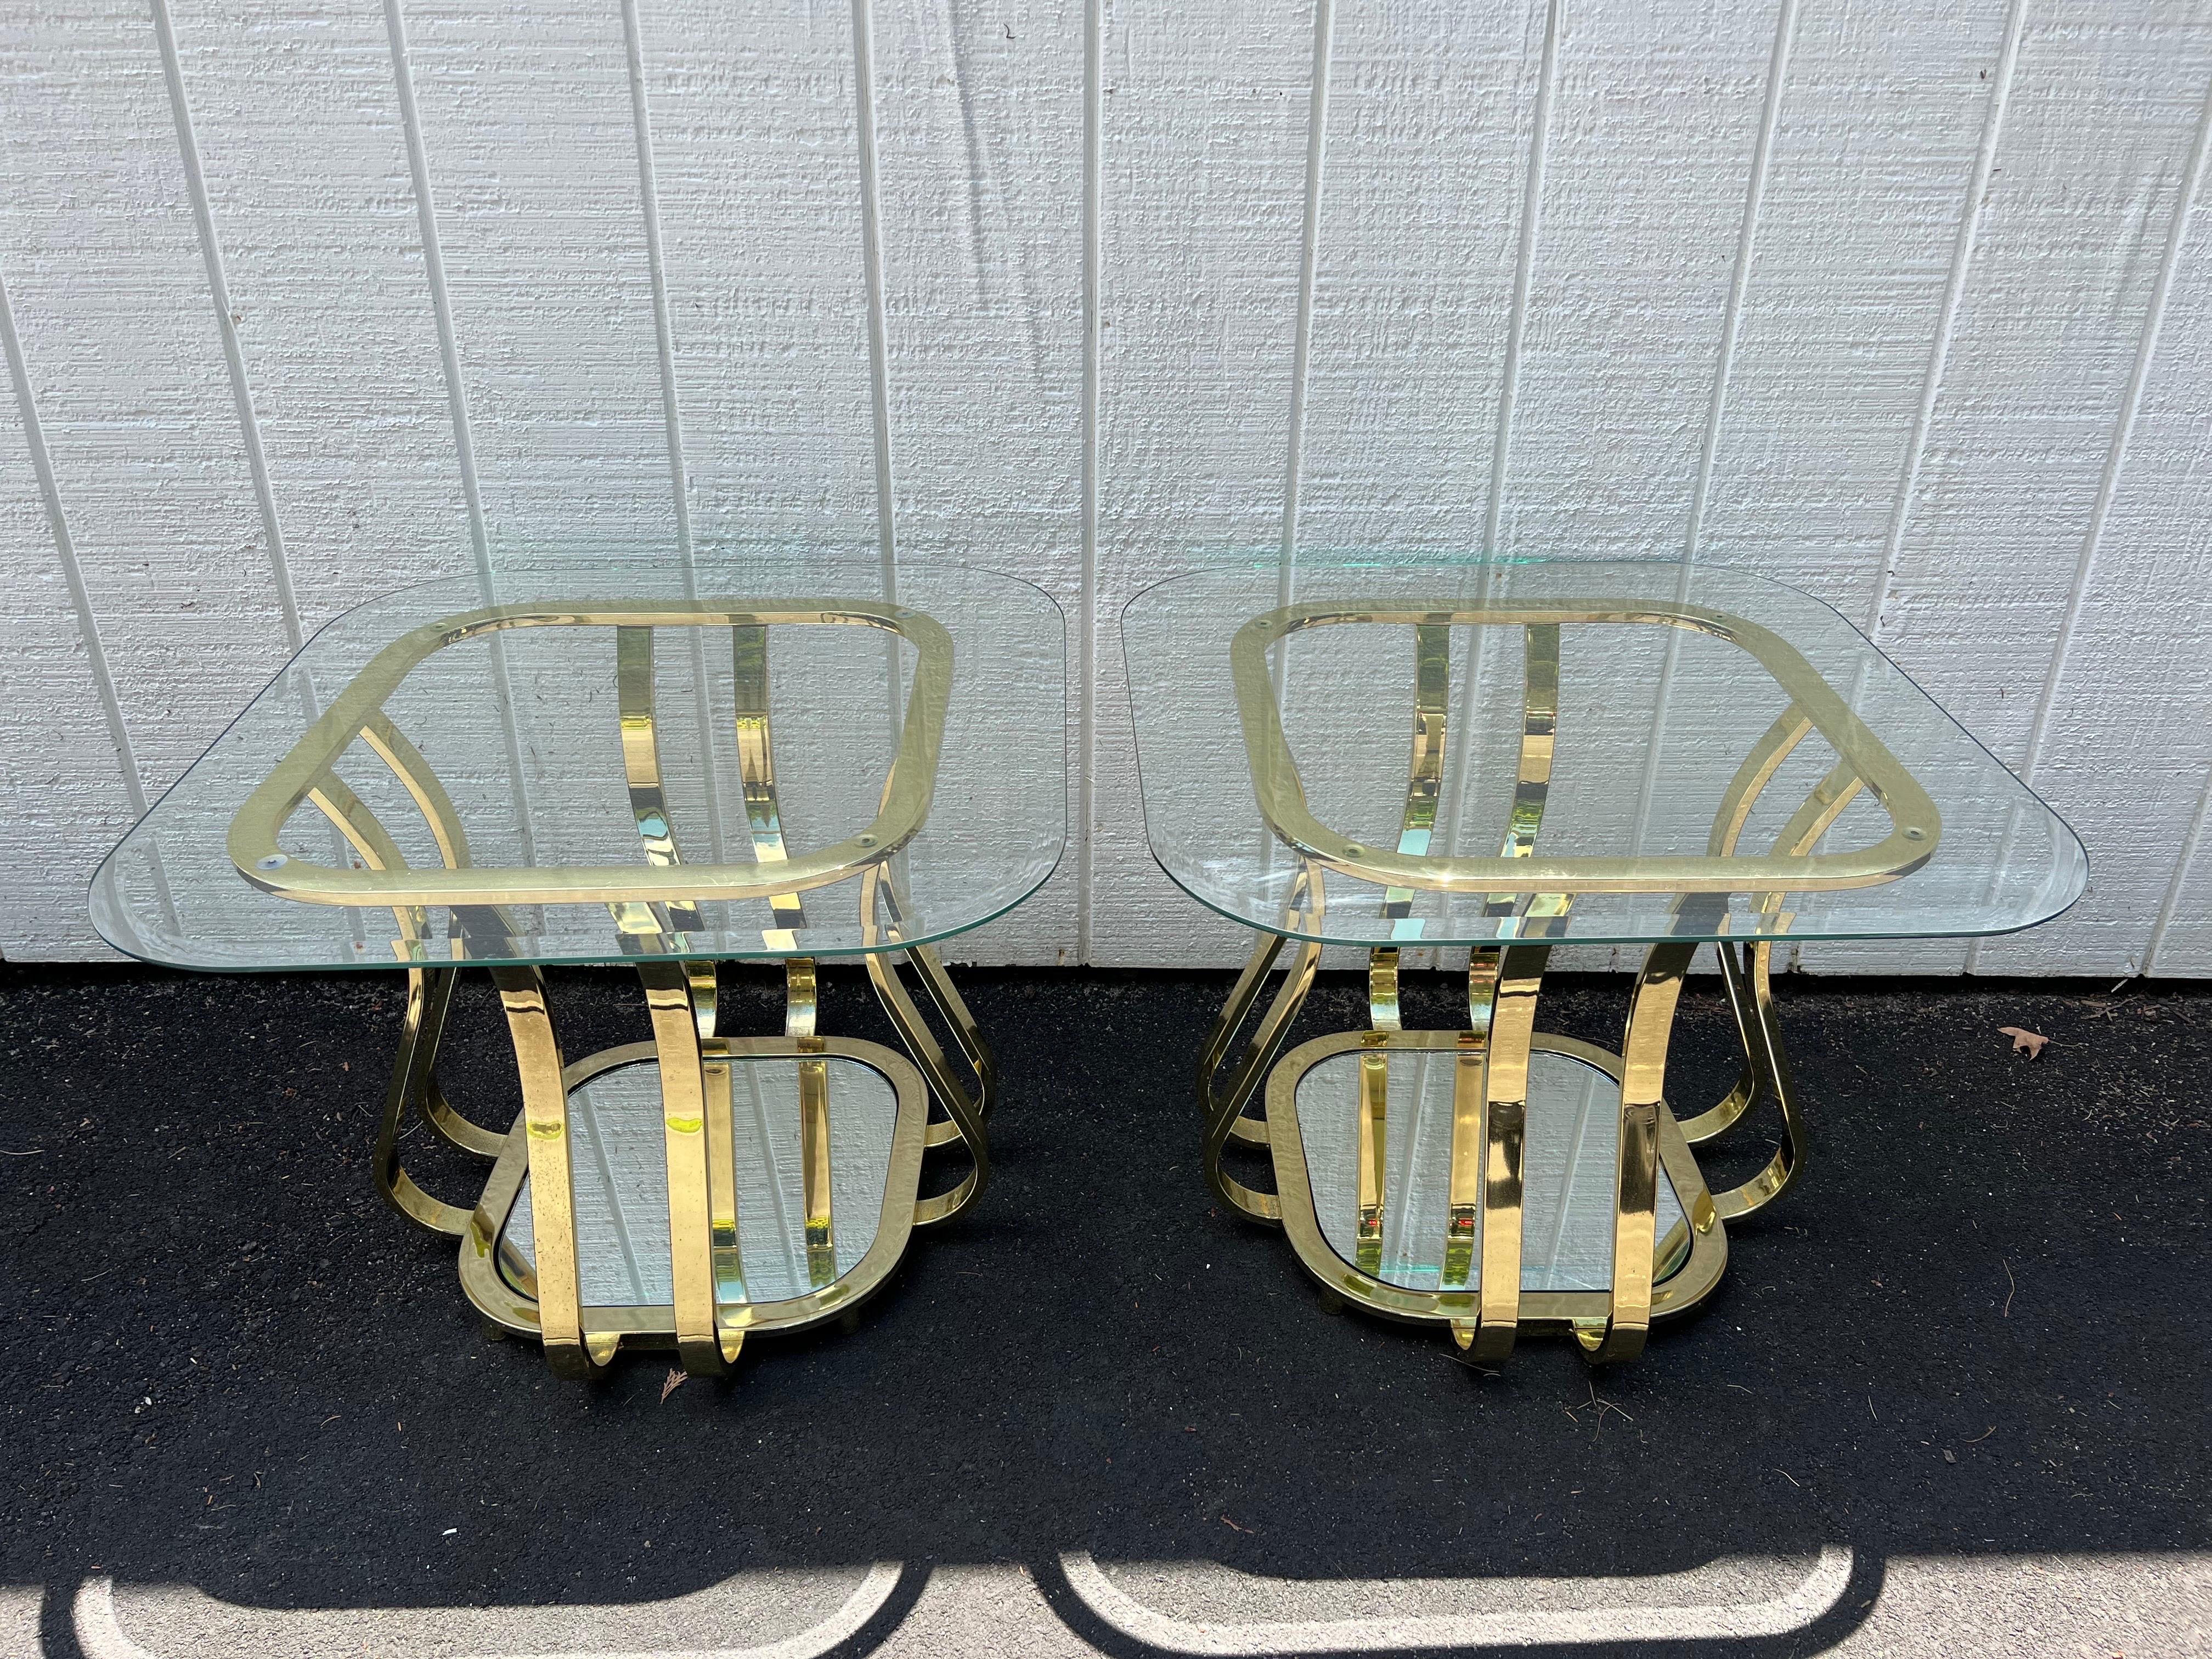 Pair of Hollywood Regency Brass and Glass end tables with mirrored bottom shelves. Art deco 1980's post modern style. These beauties will bring high glamour to any room.
